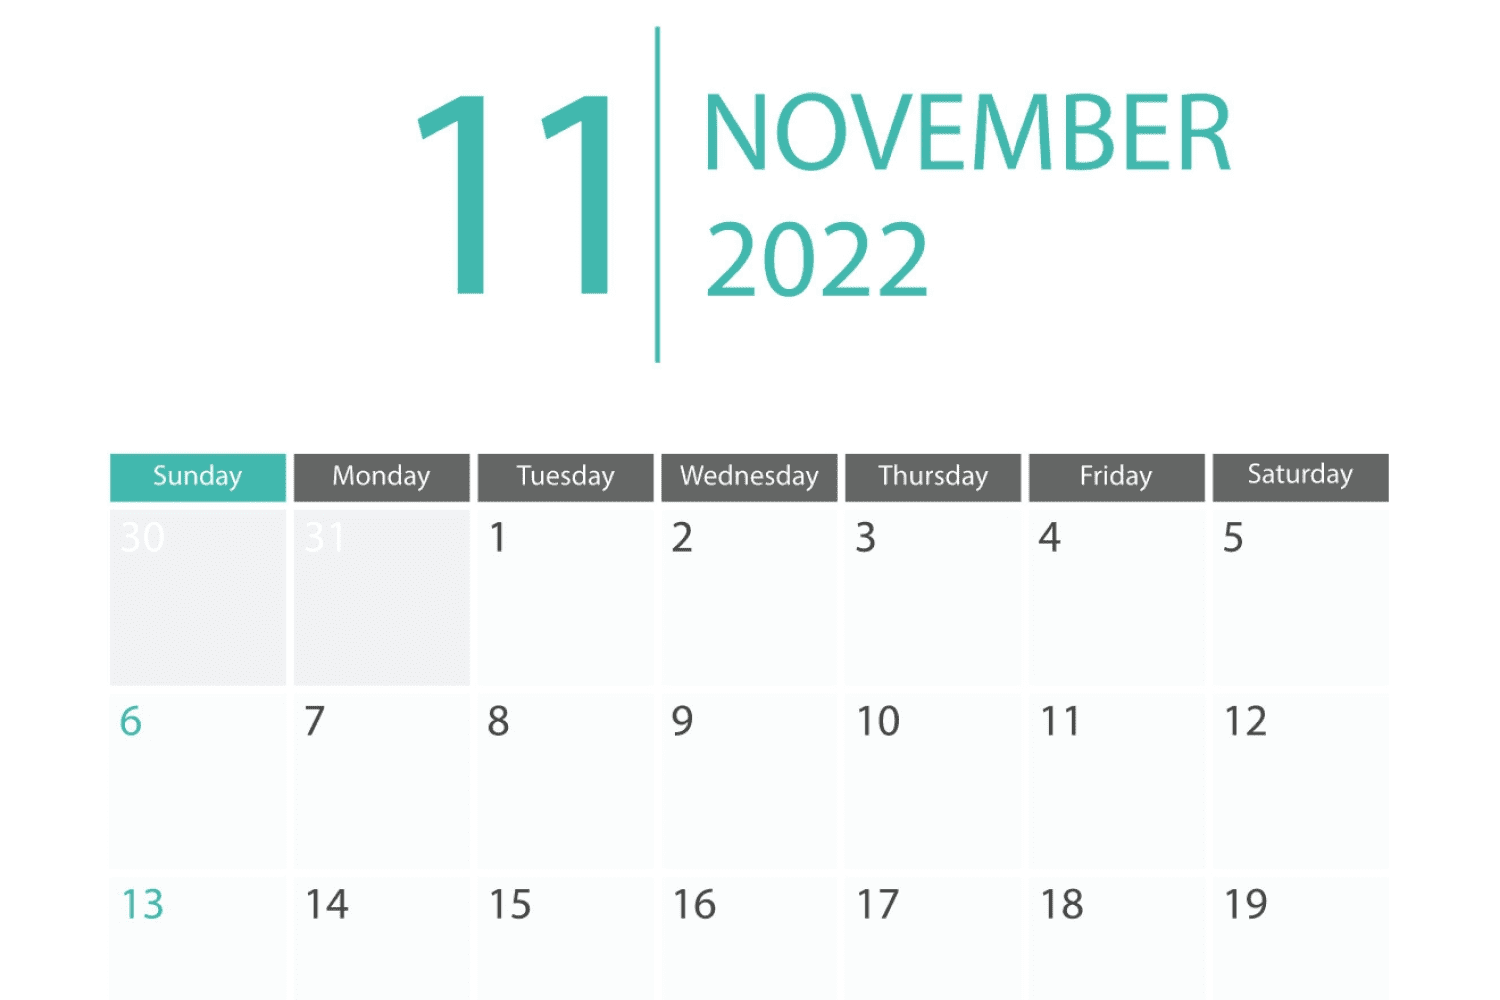 November calendar with white background and large green heading.